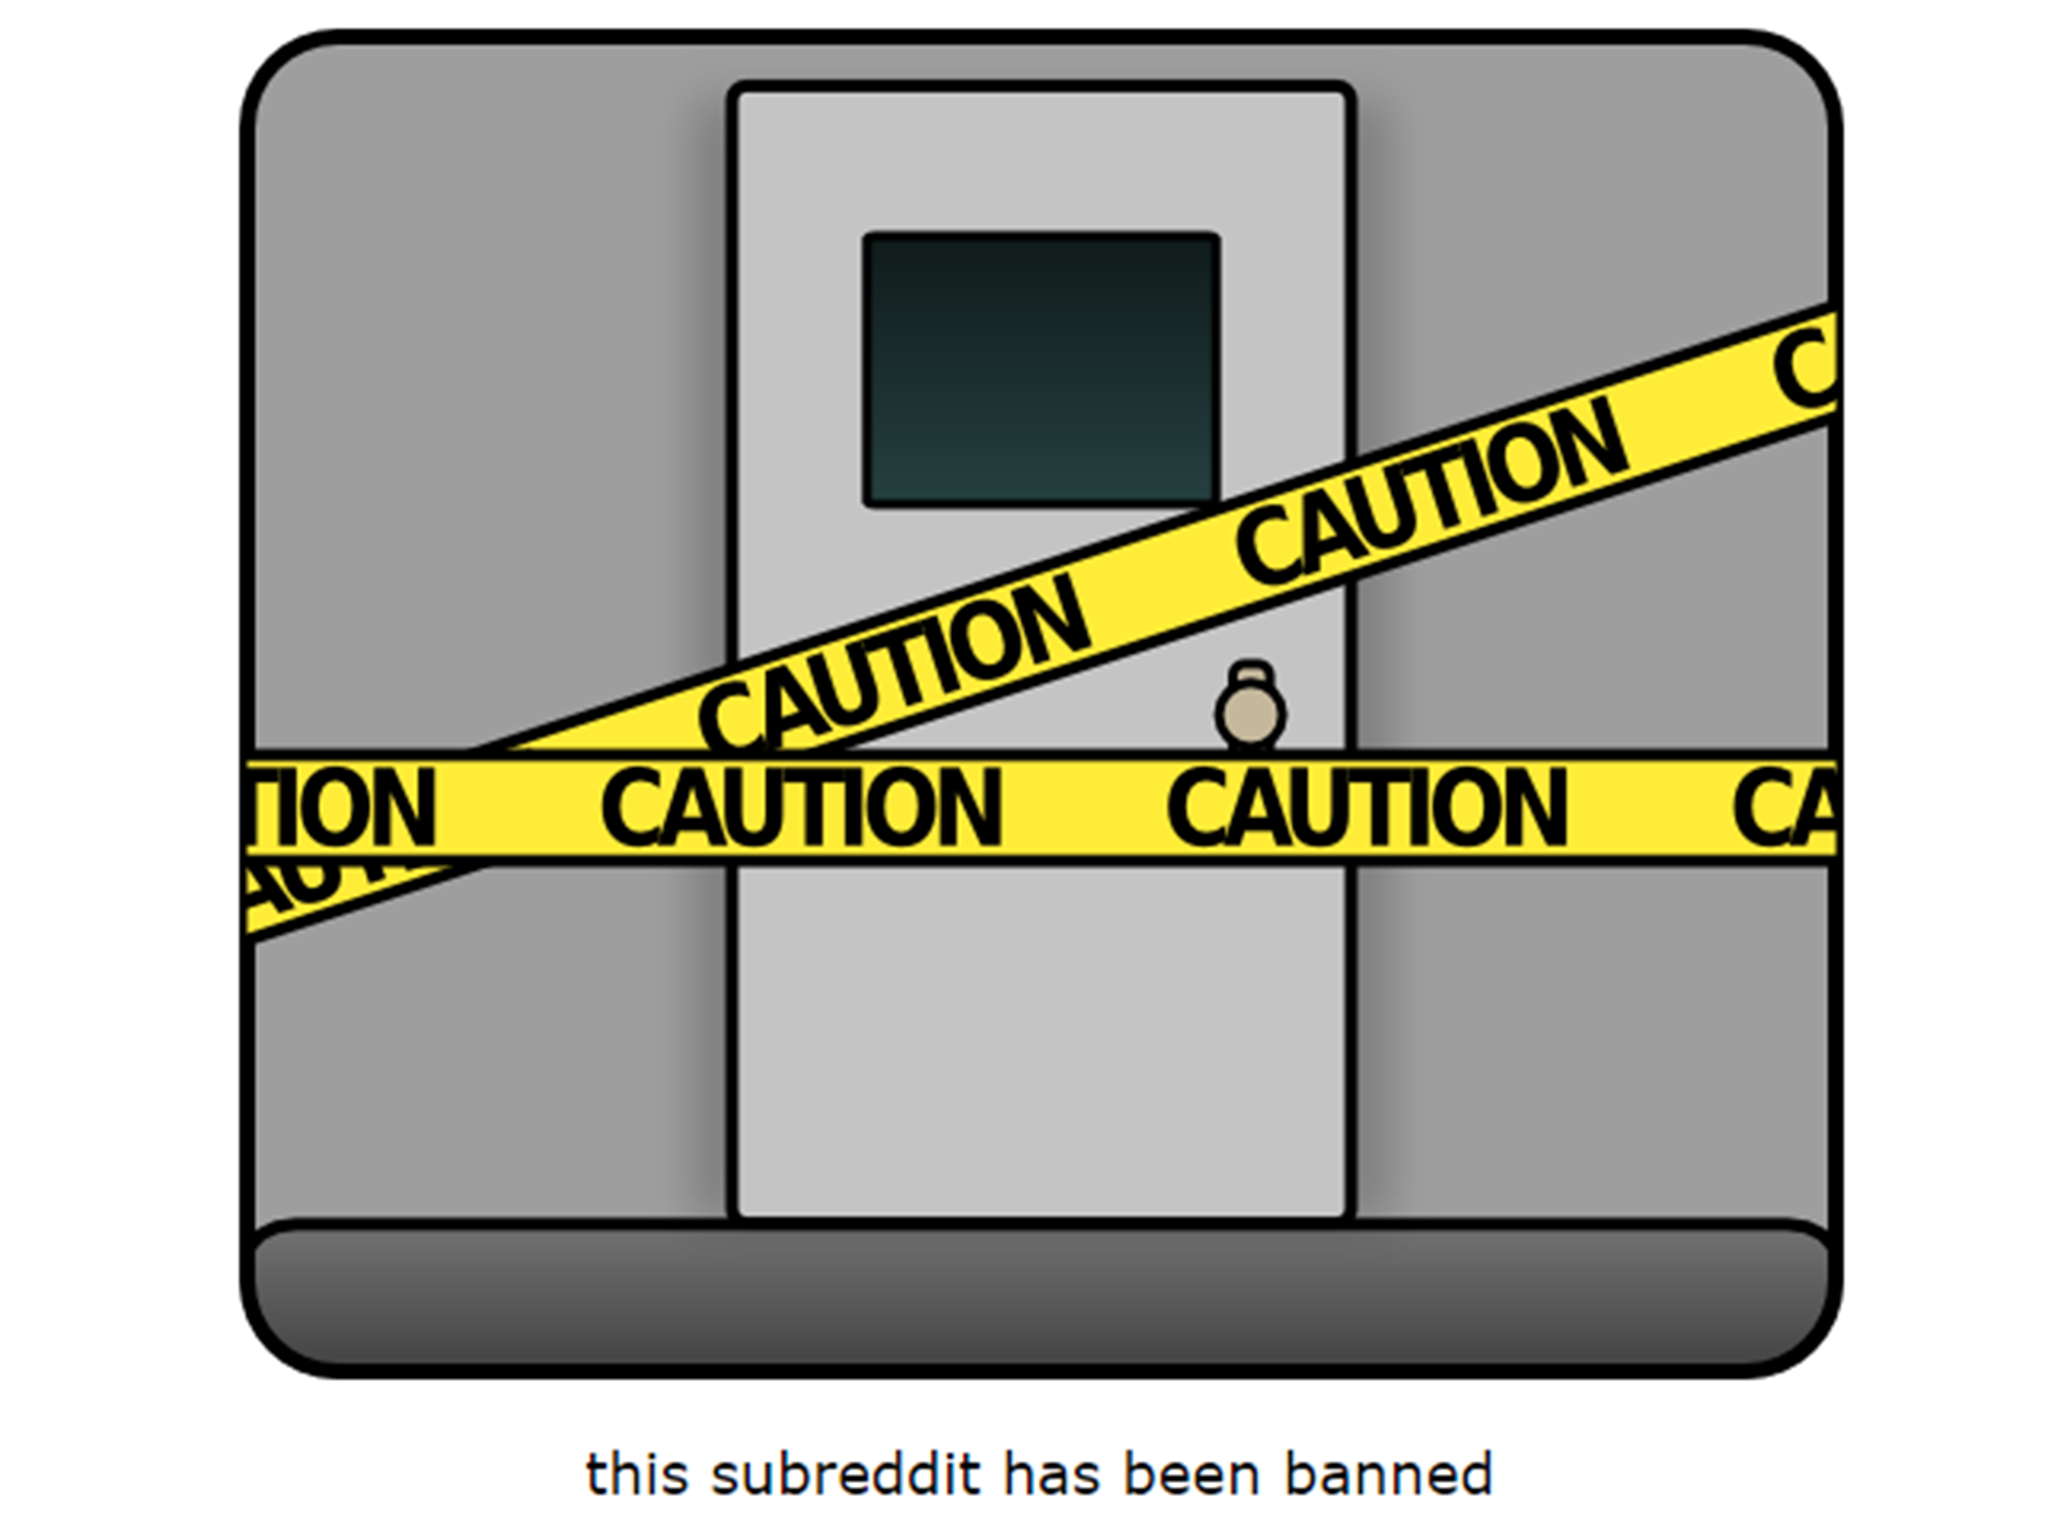 Reddit has shut down the notorious fappening webpage